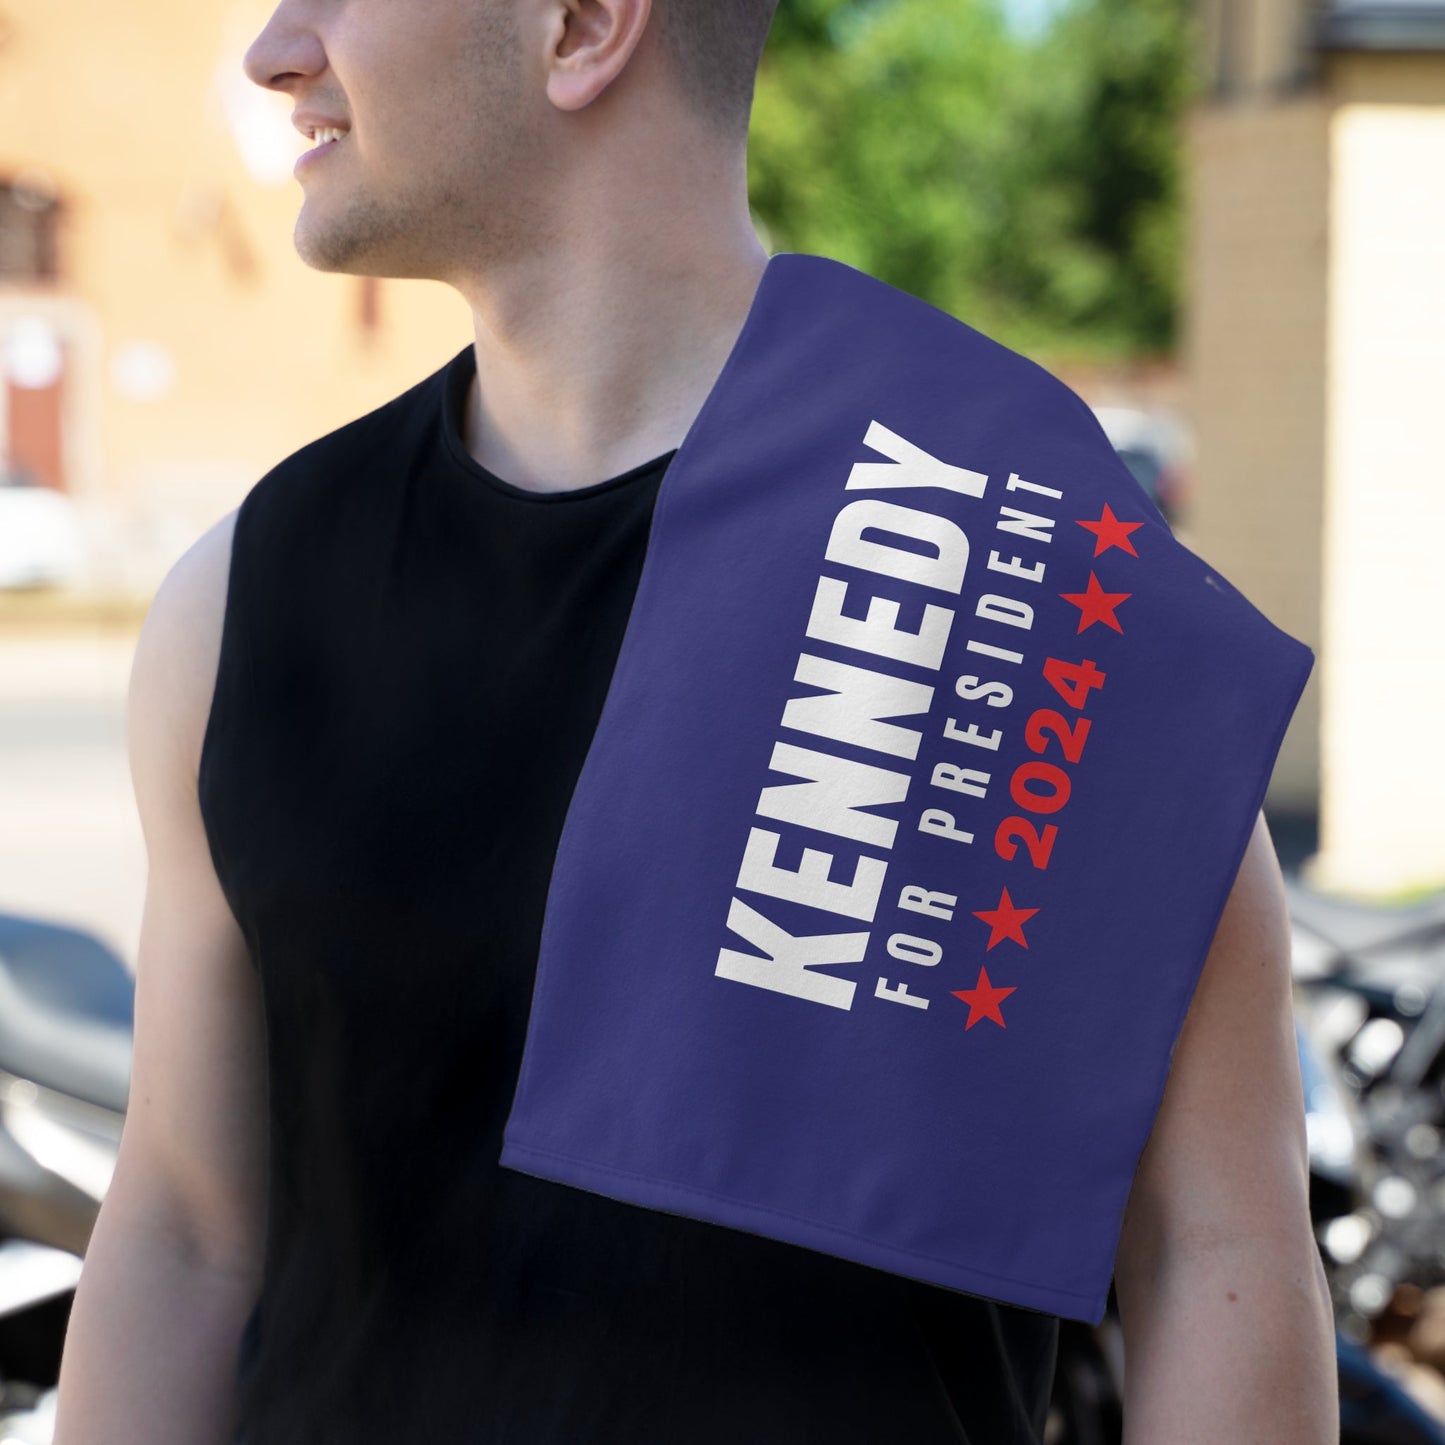 Kennedy for President Stars Rally Towel, 11x18 - TEAM KENNEDY. All rights reserved